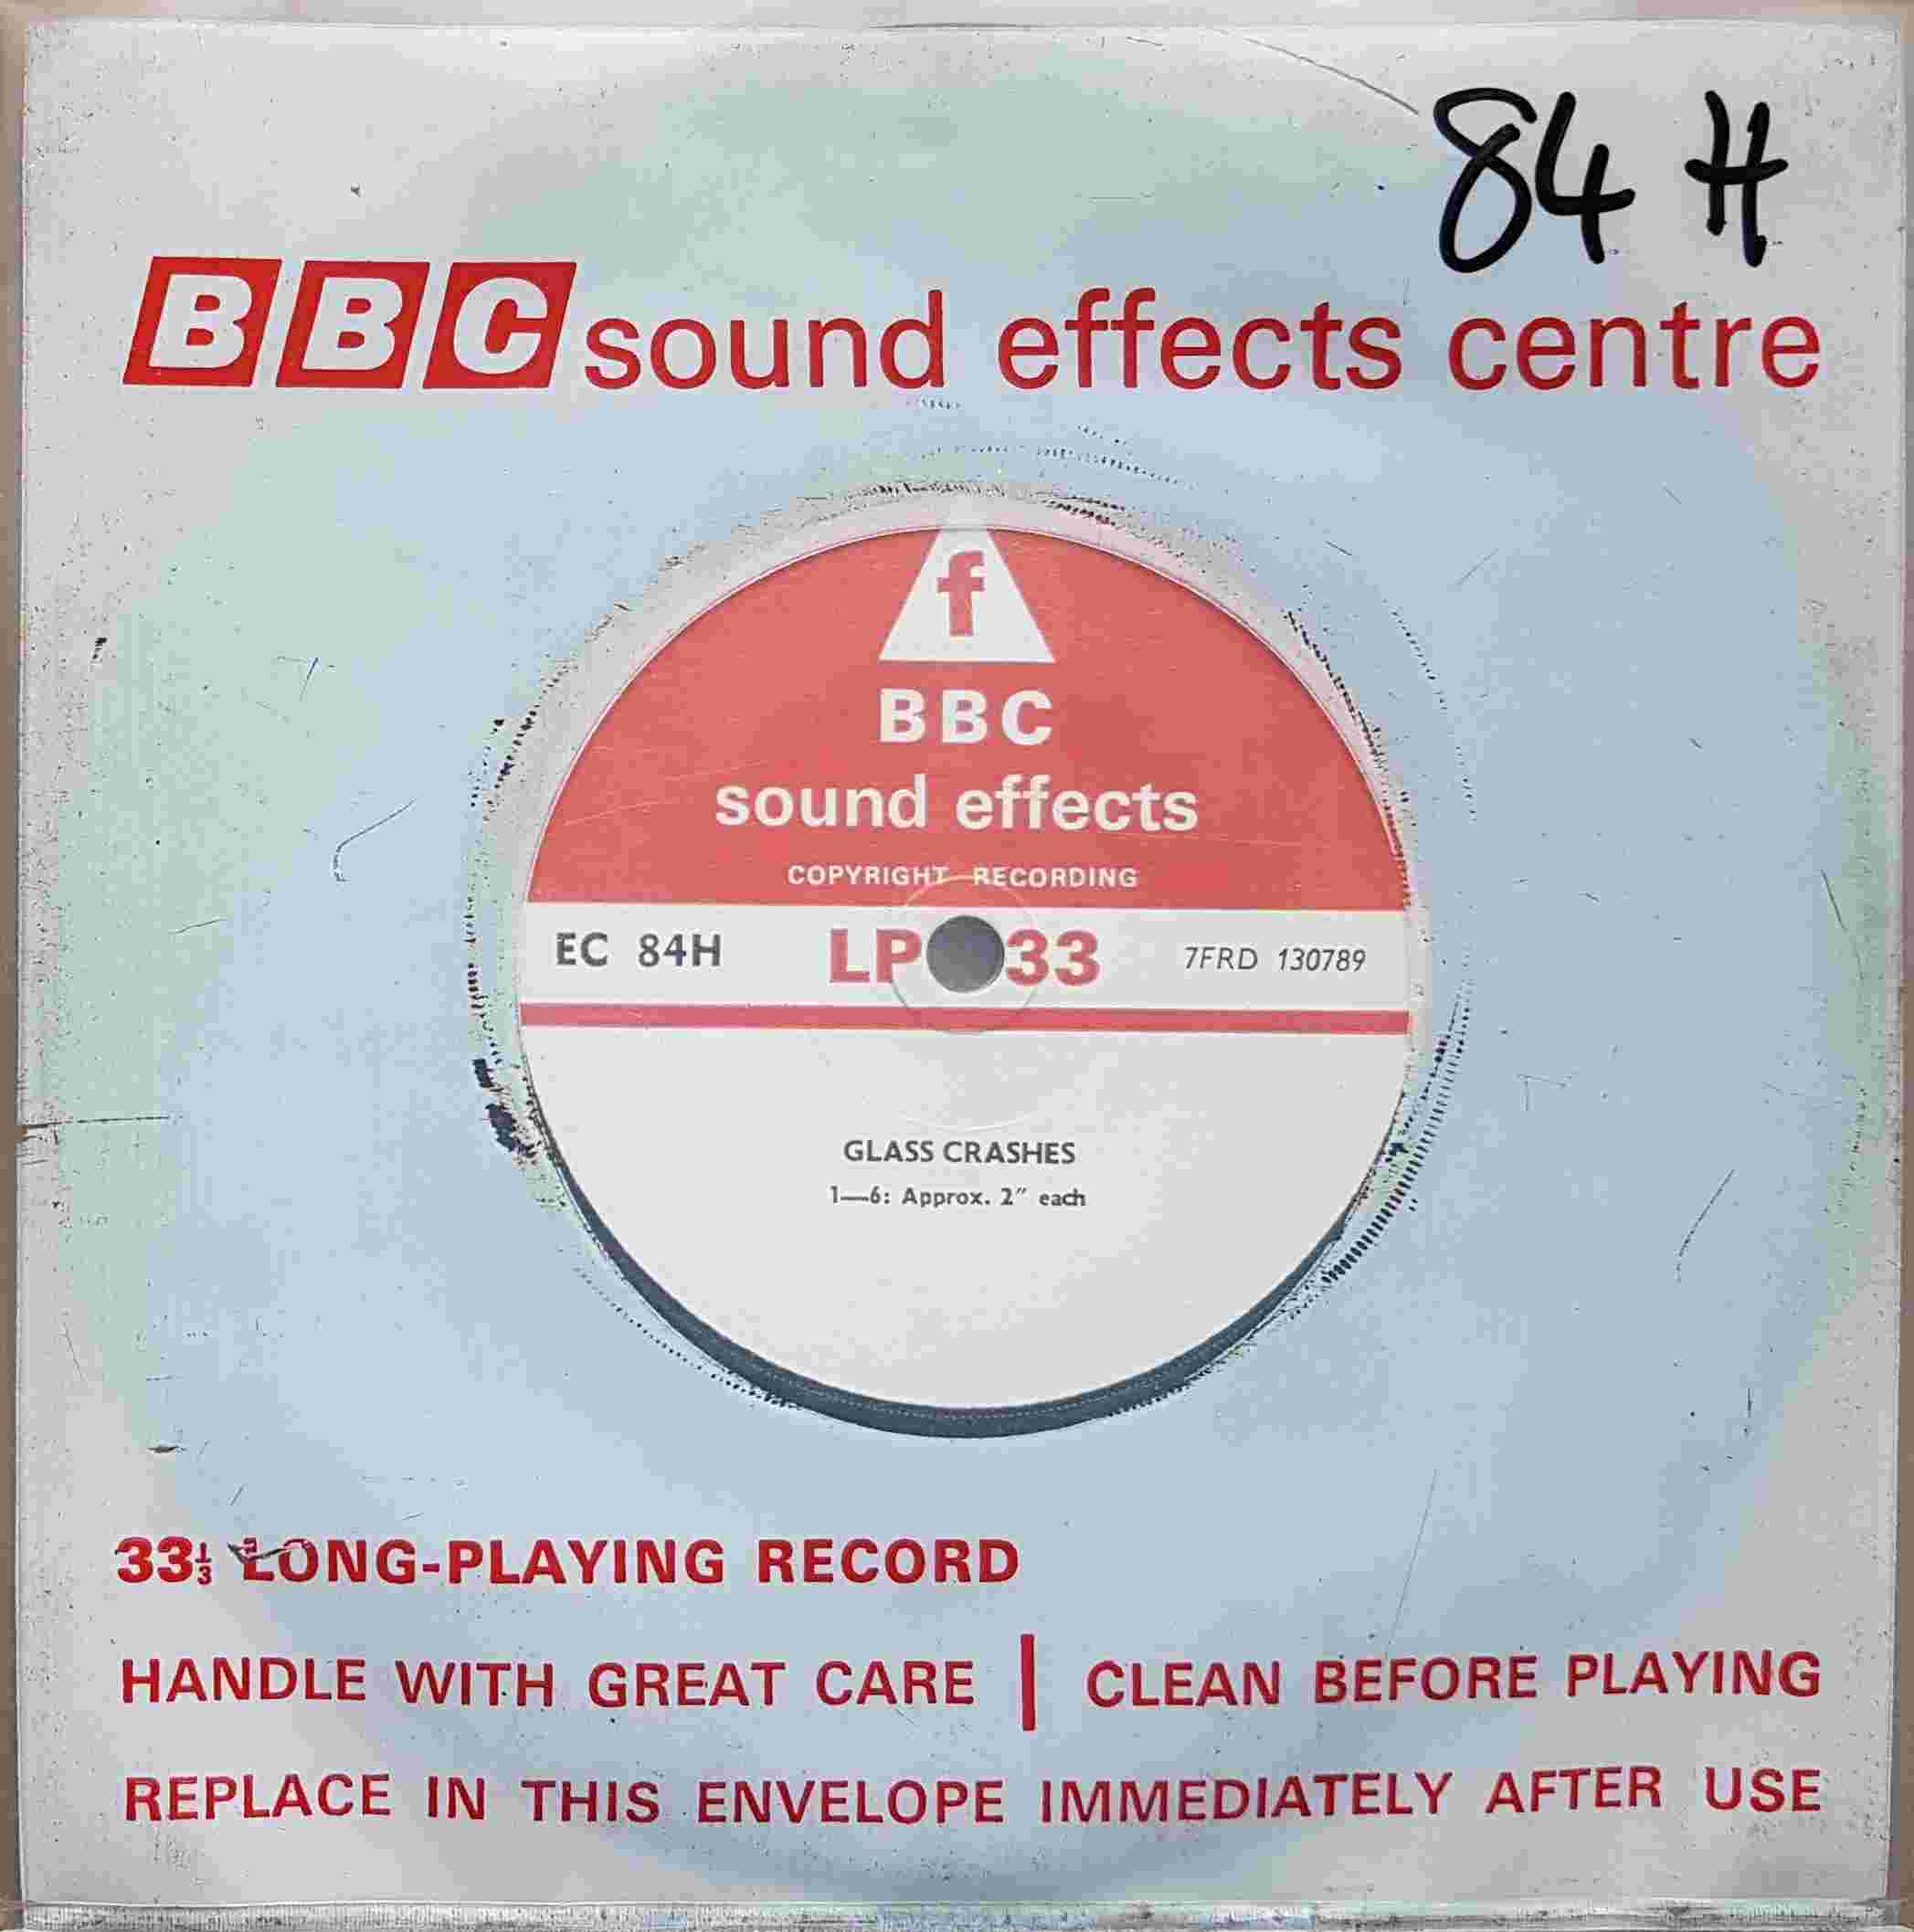 Picture of EC 84H Glass crashes by artist Not registered from the BBC singles - Records and Tapes library